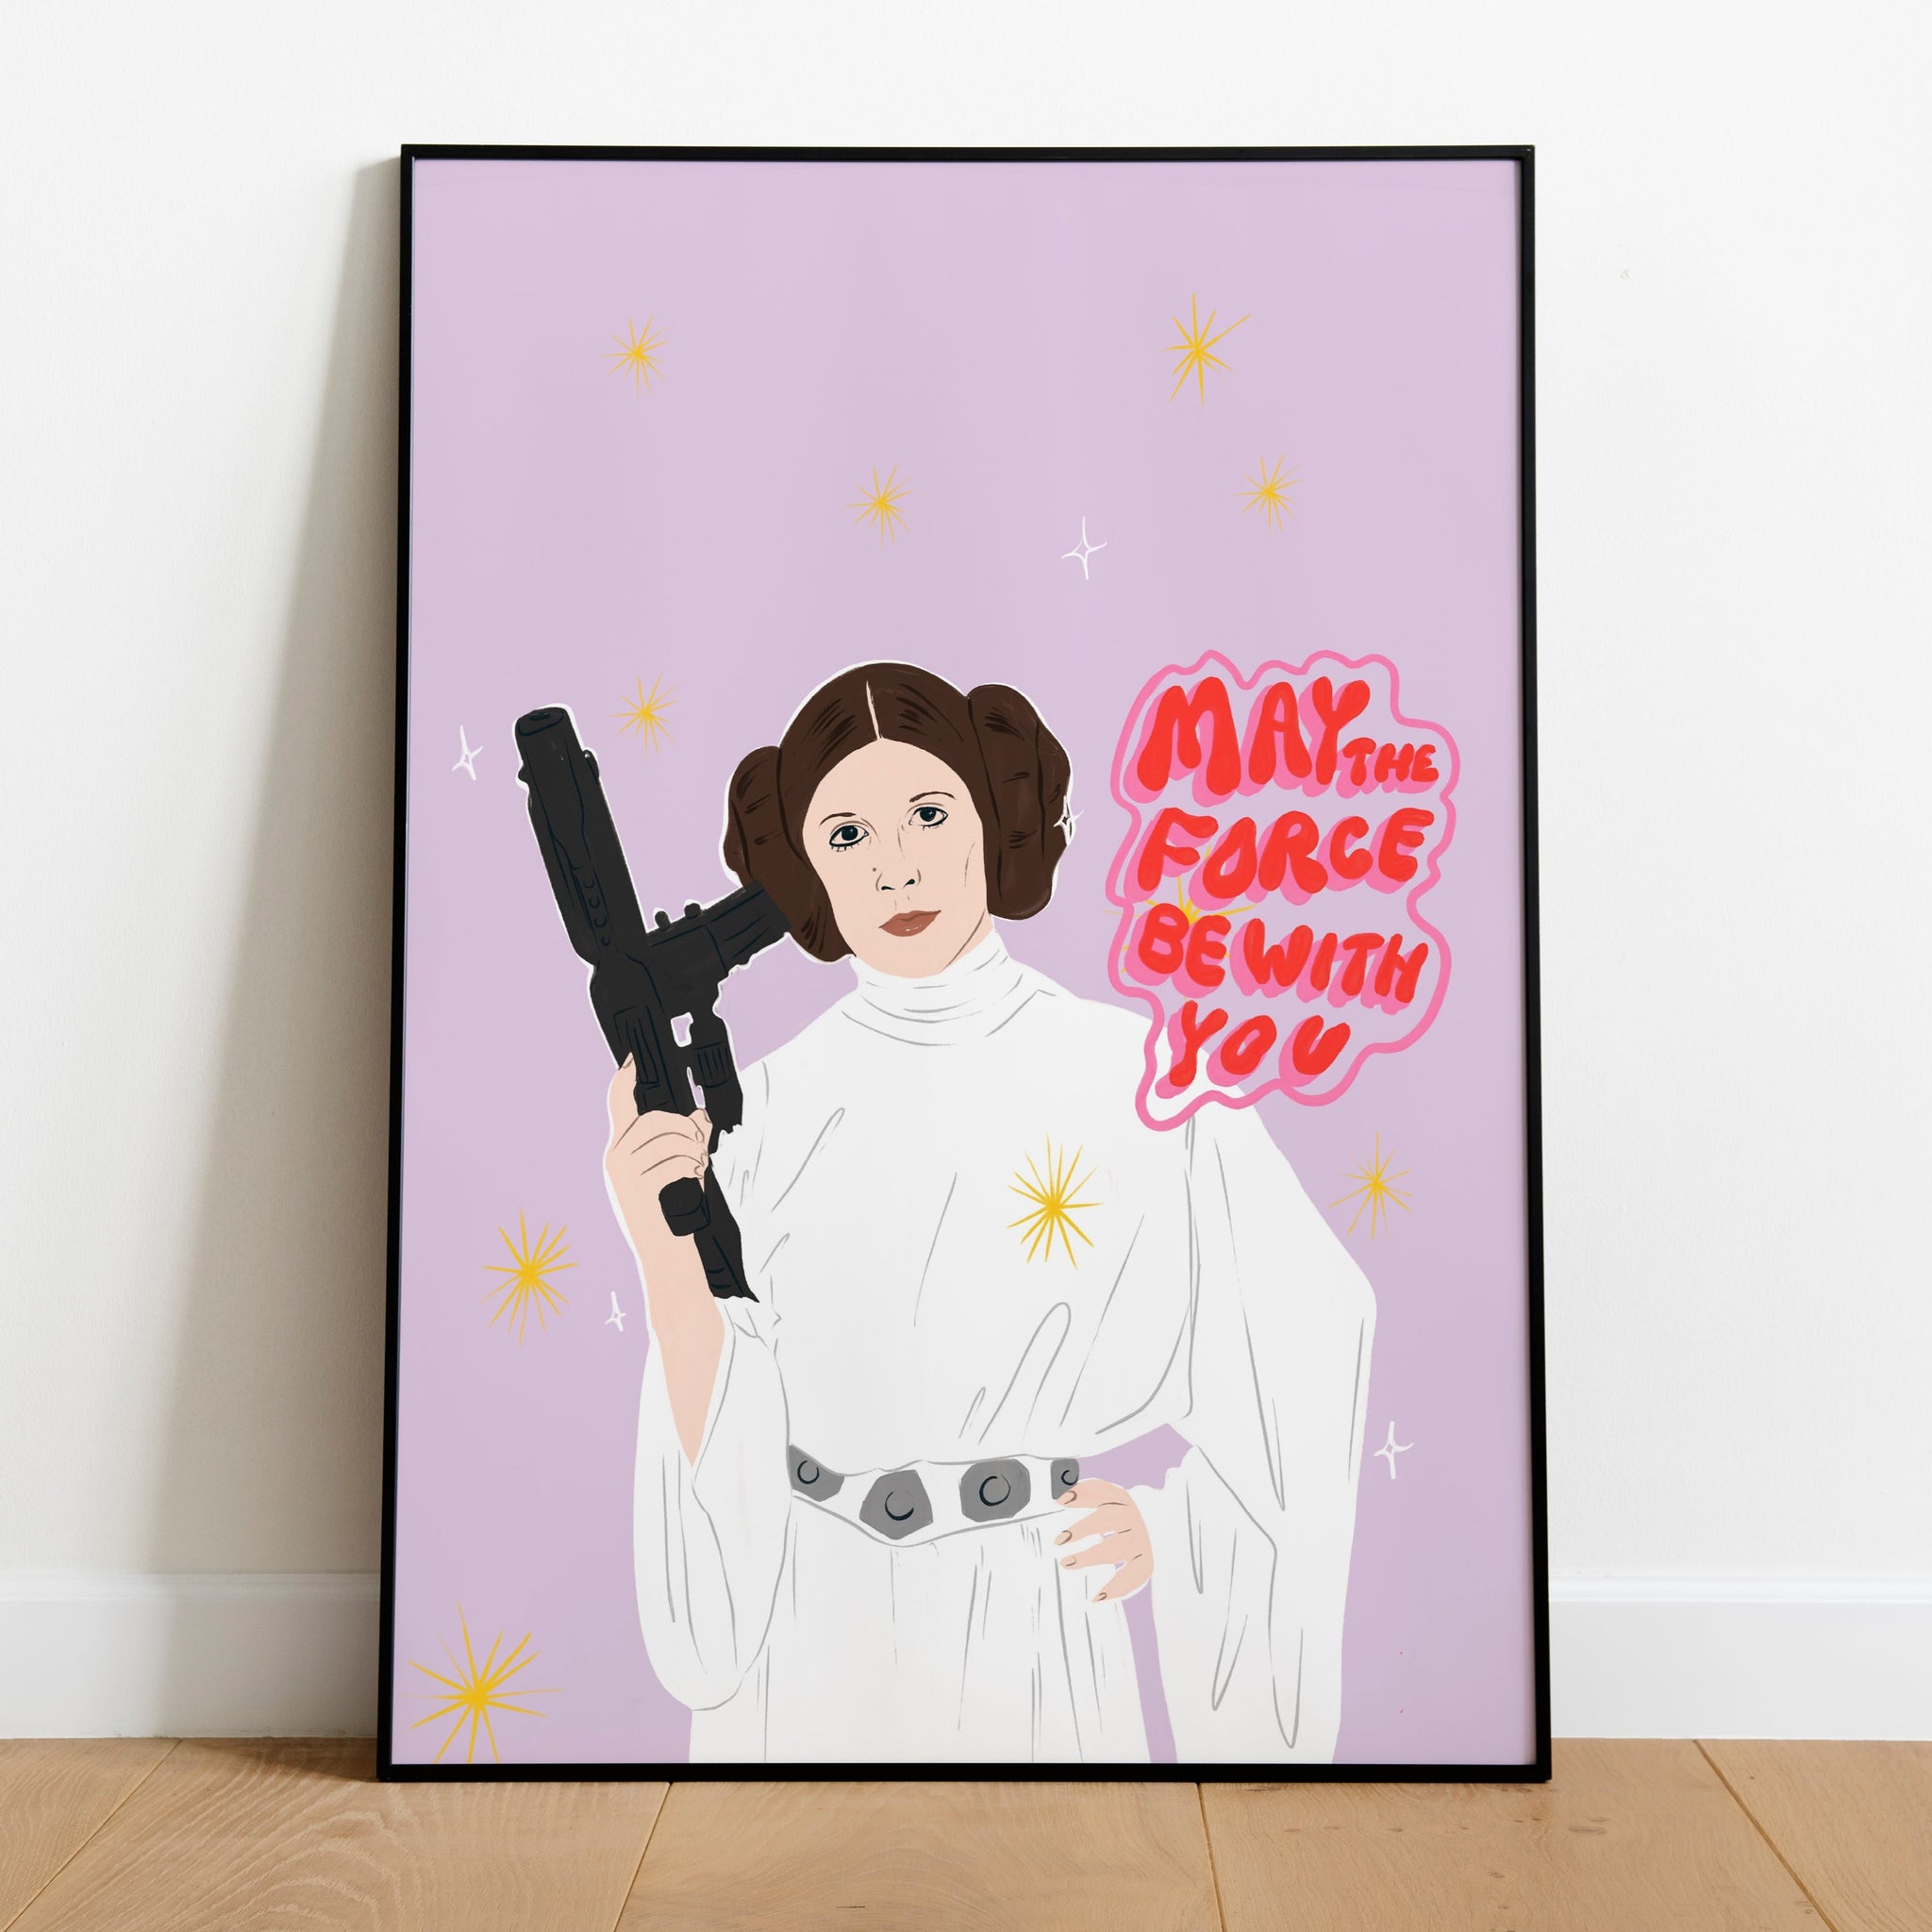 image of a framed art print featuring an illustration of Princess Leia alongside the hand lettered words 'may the force be with you'.